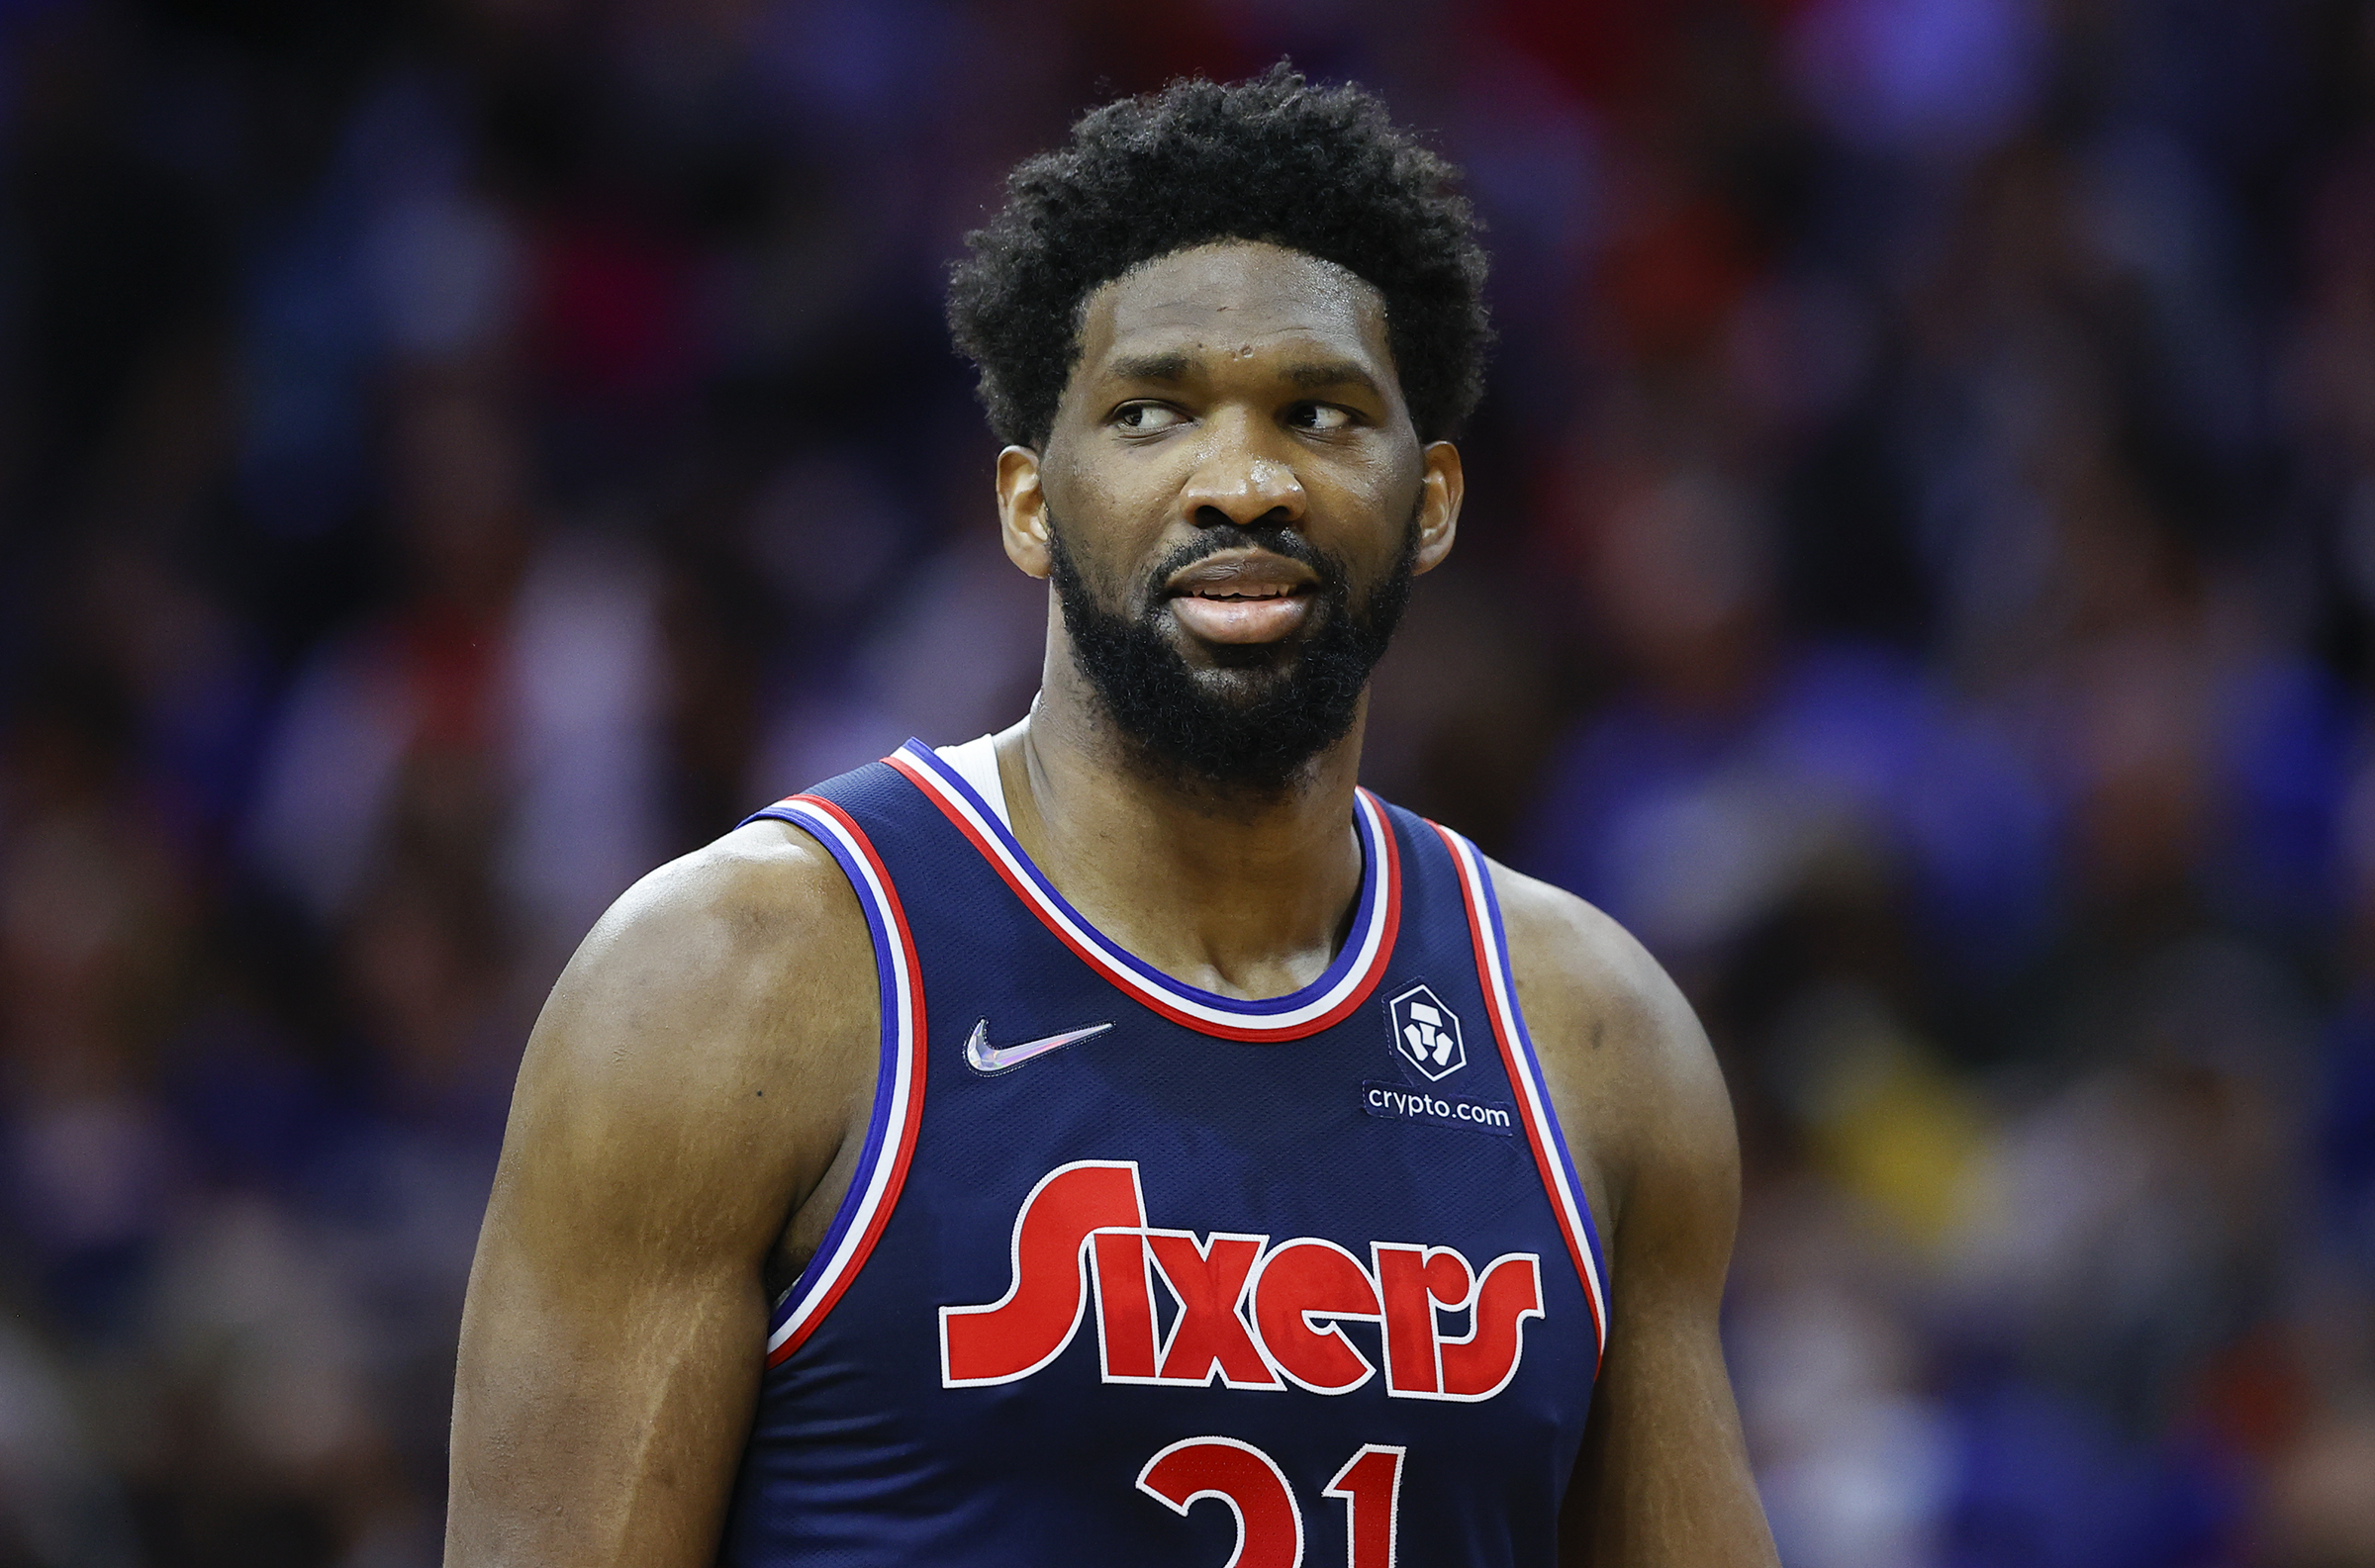 Joel Embiid drops 44-points and helps the 76ers to cement their place in the playoffs